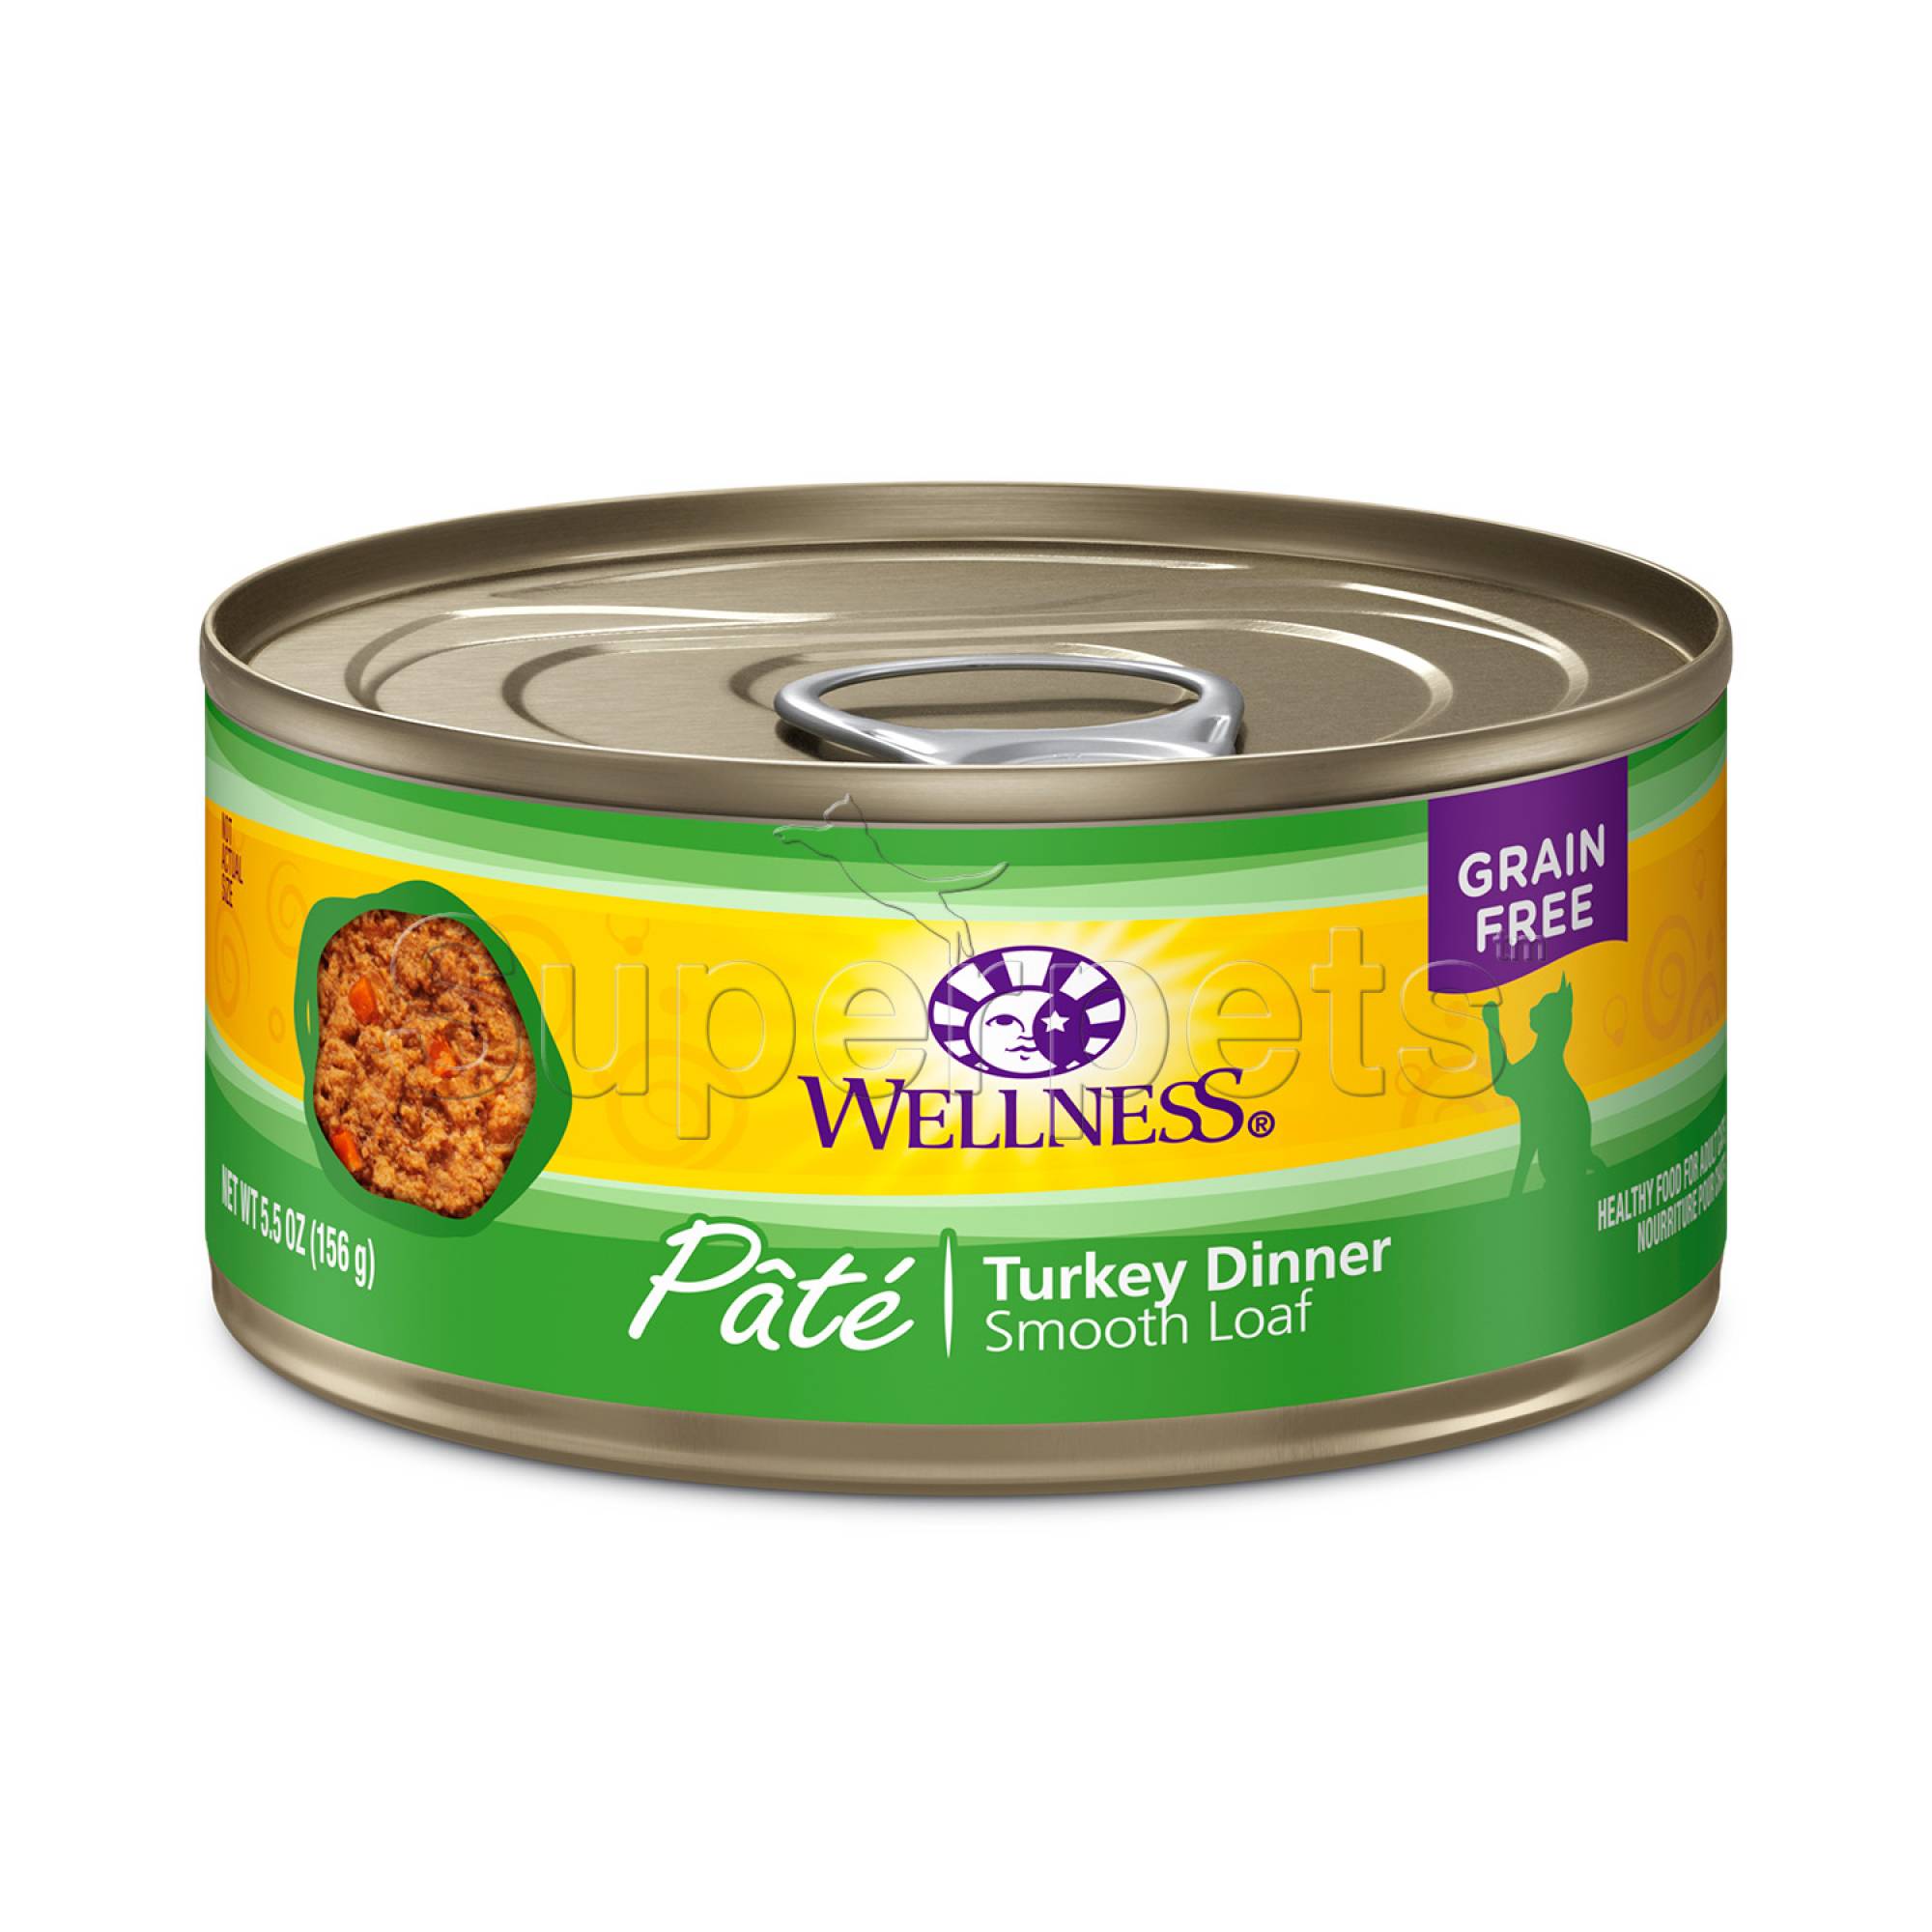 Wellness - Cat Complete Health Grain-Free 156g Pate Turkey Dinner Smooth Loaf